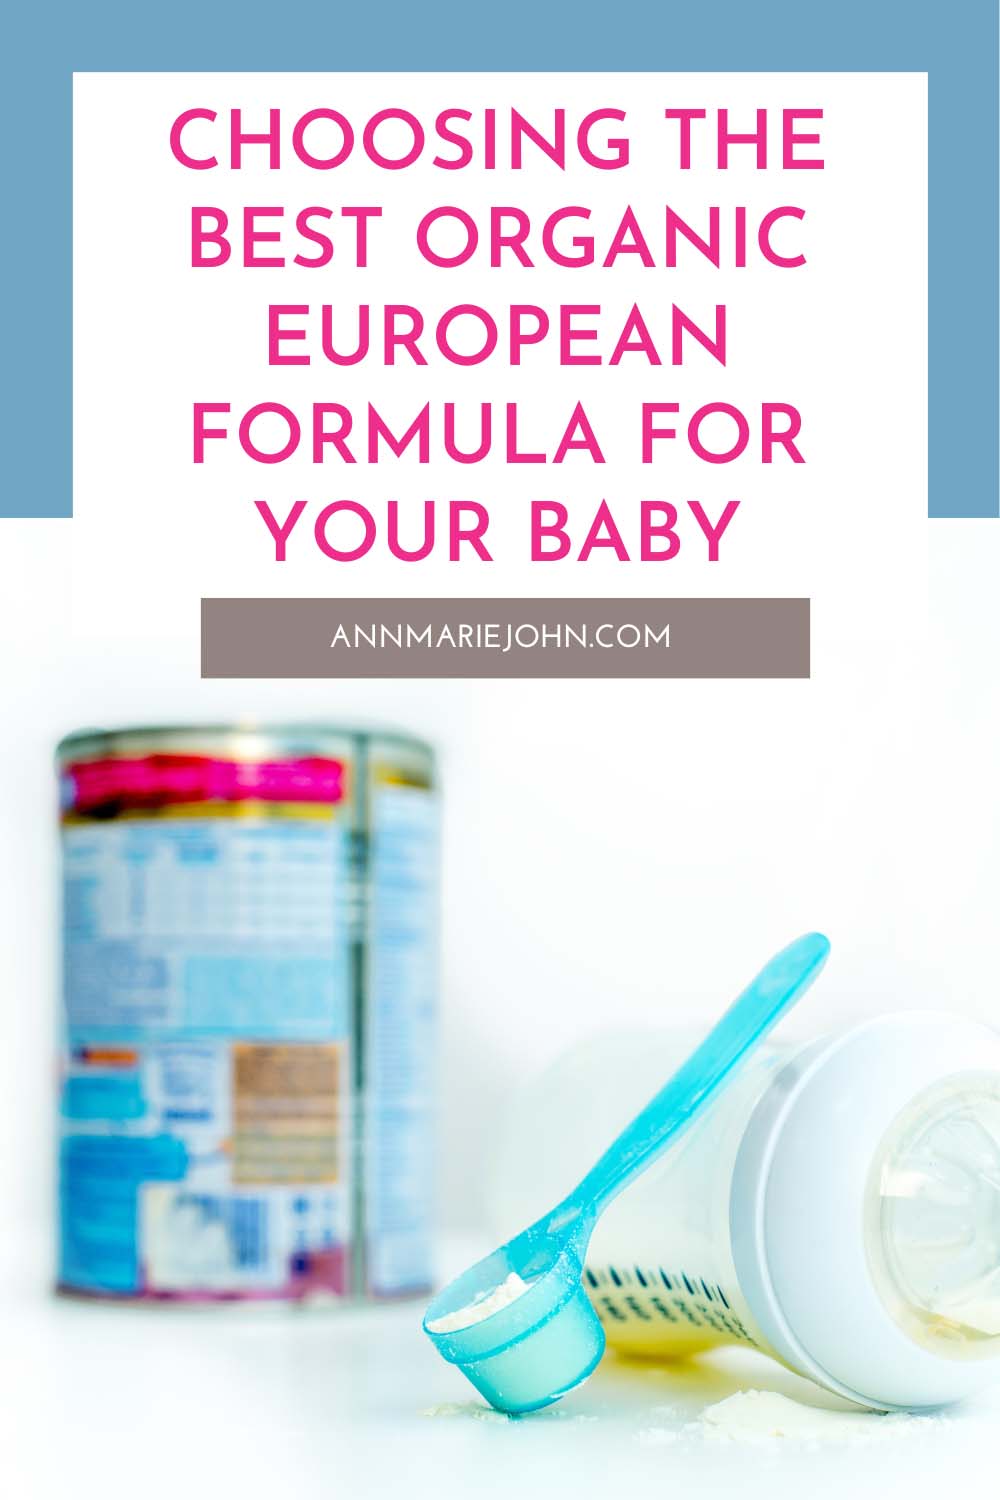 Choosing the Best Organic European Formula for Your Baby